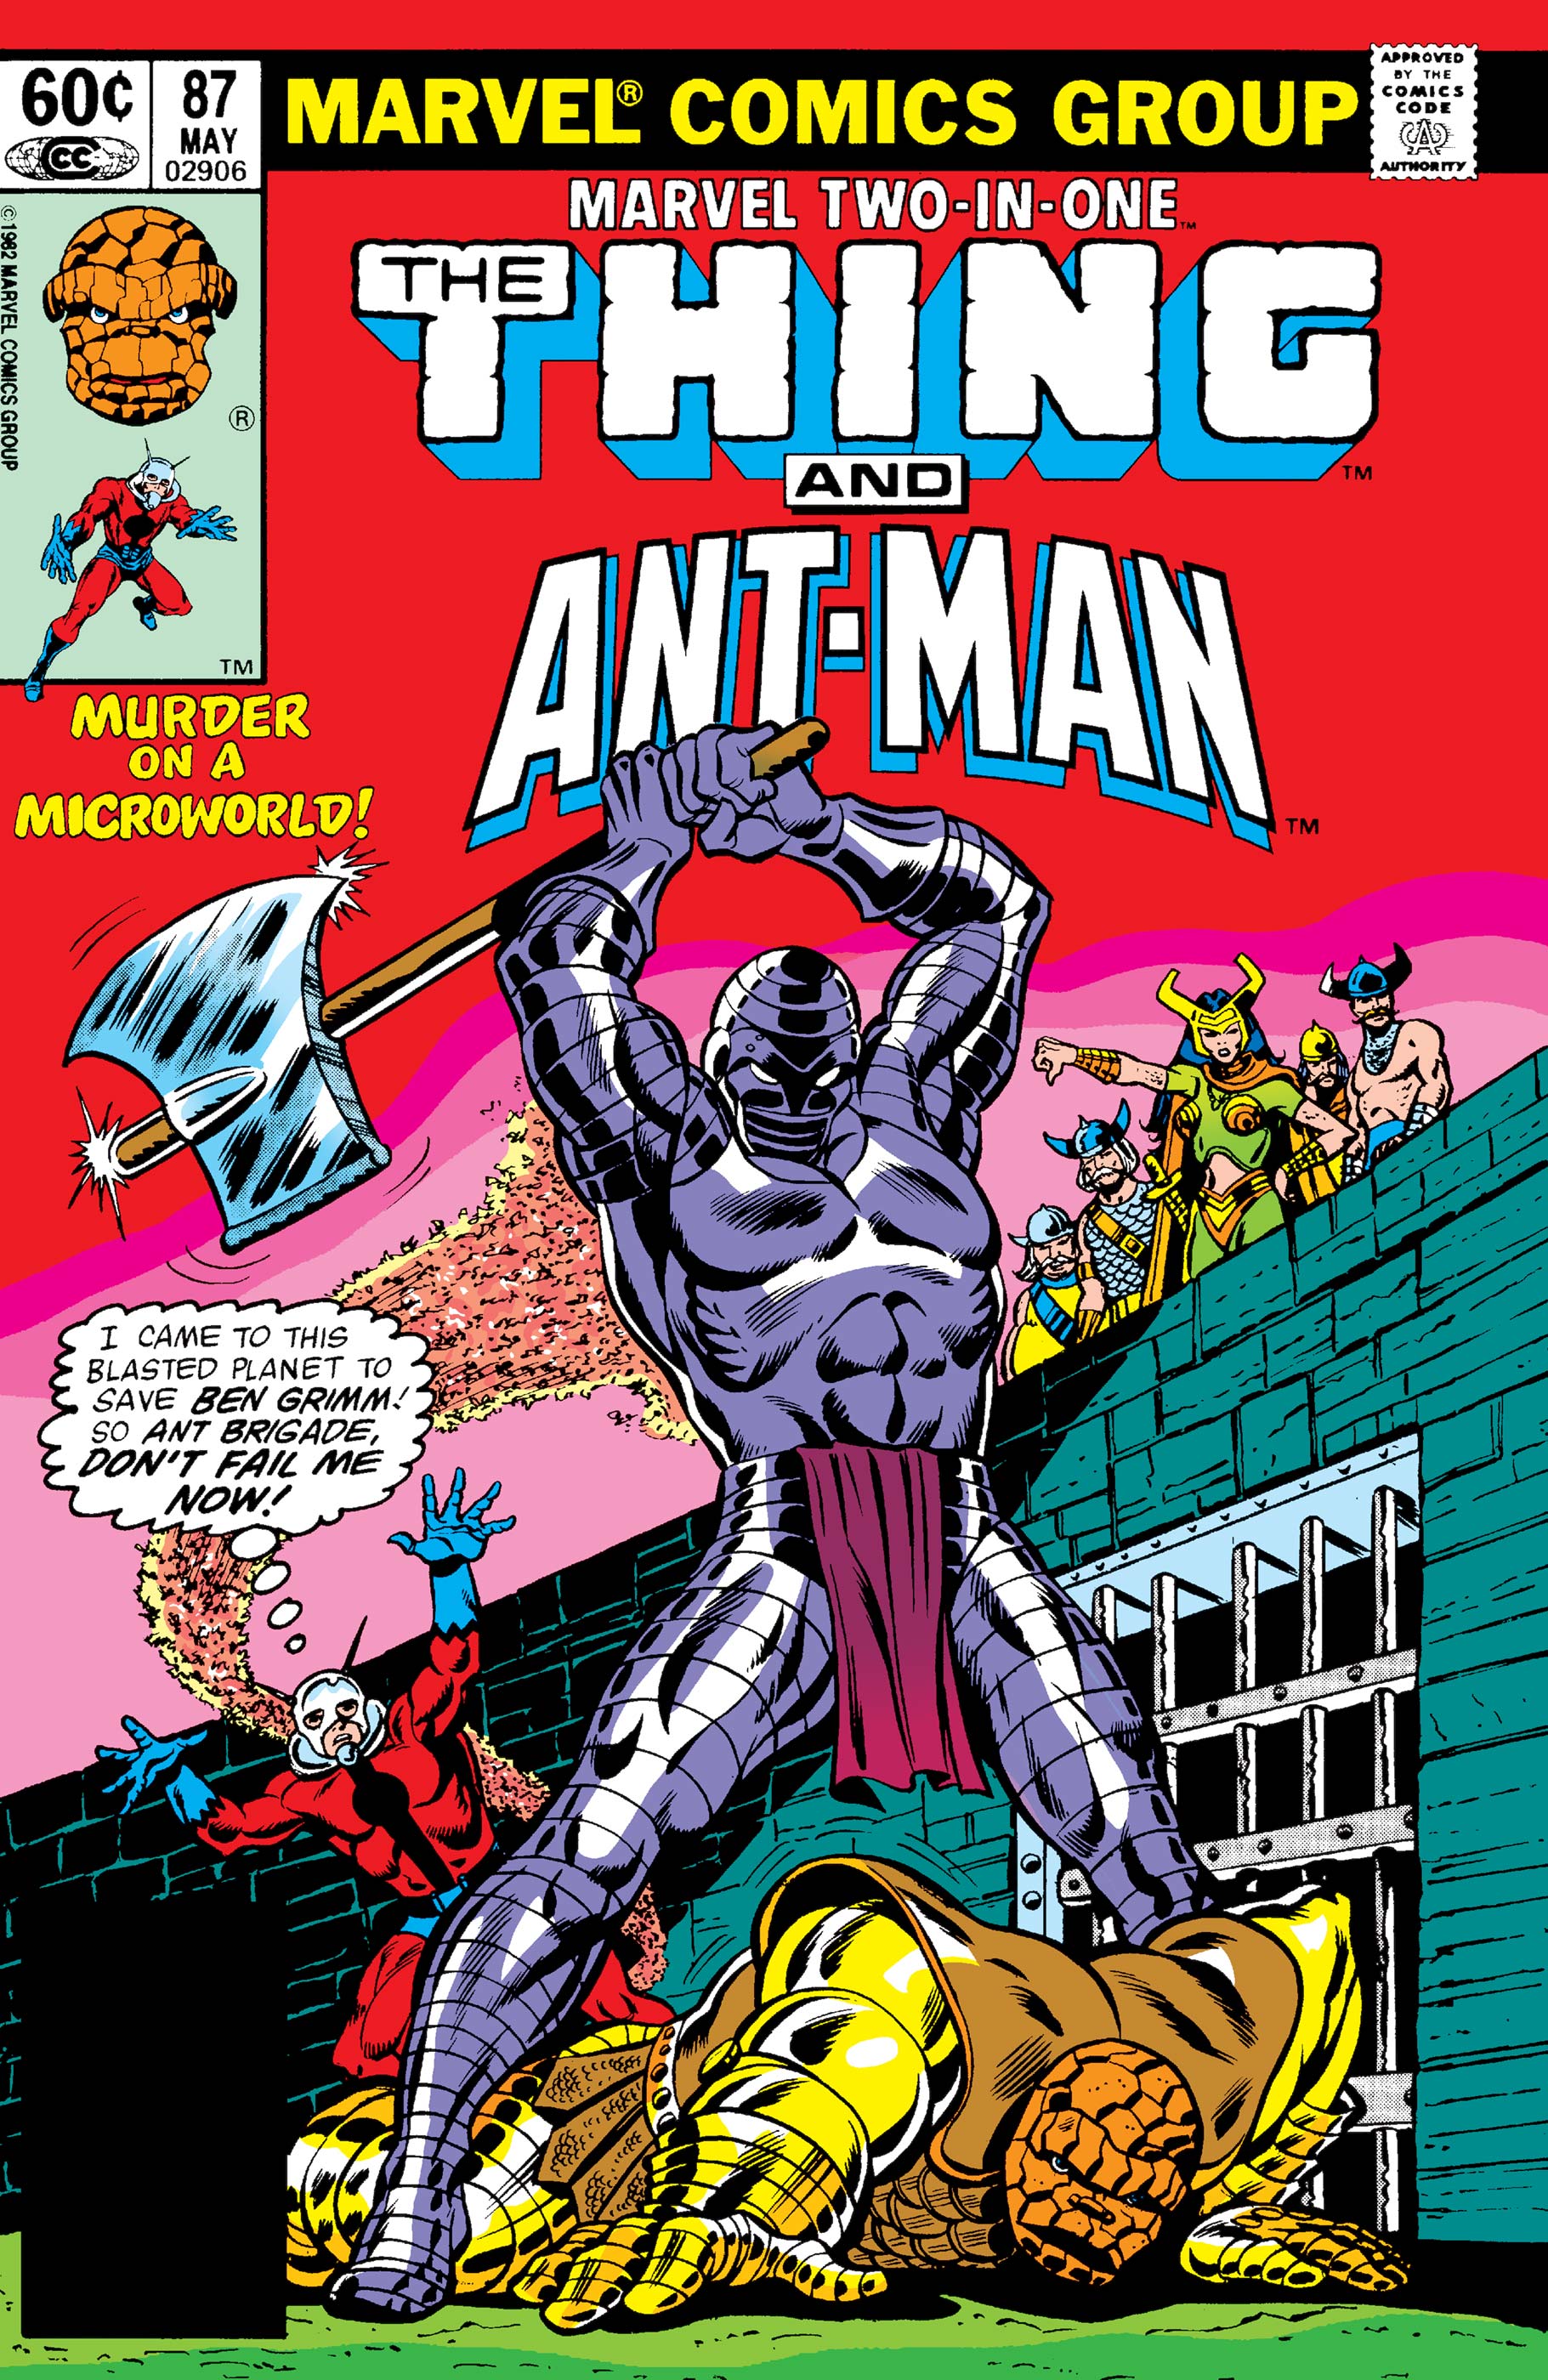 Marvel Two-in-One (1974) #87